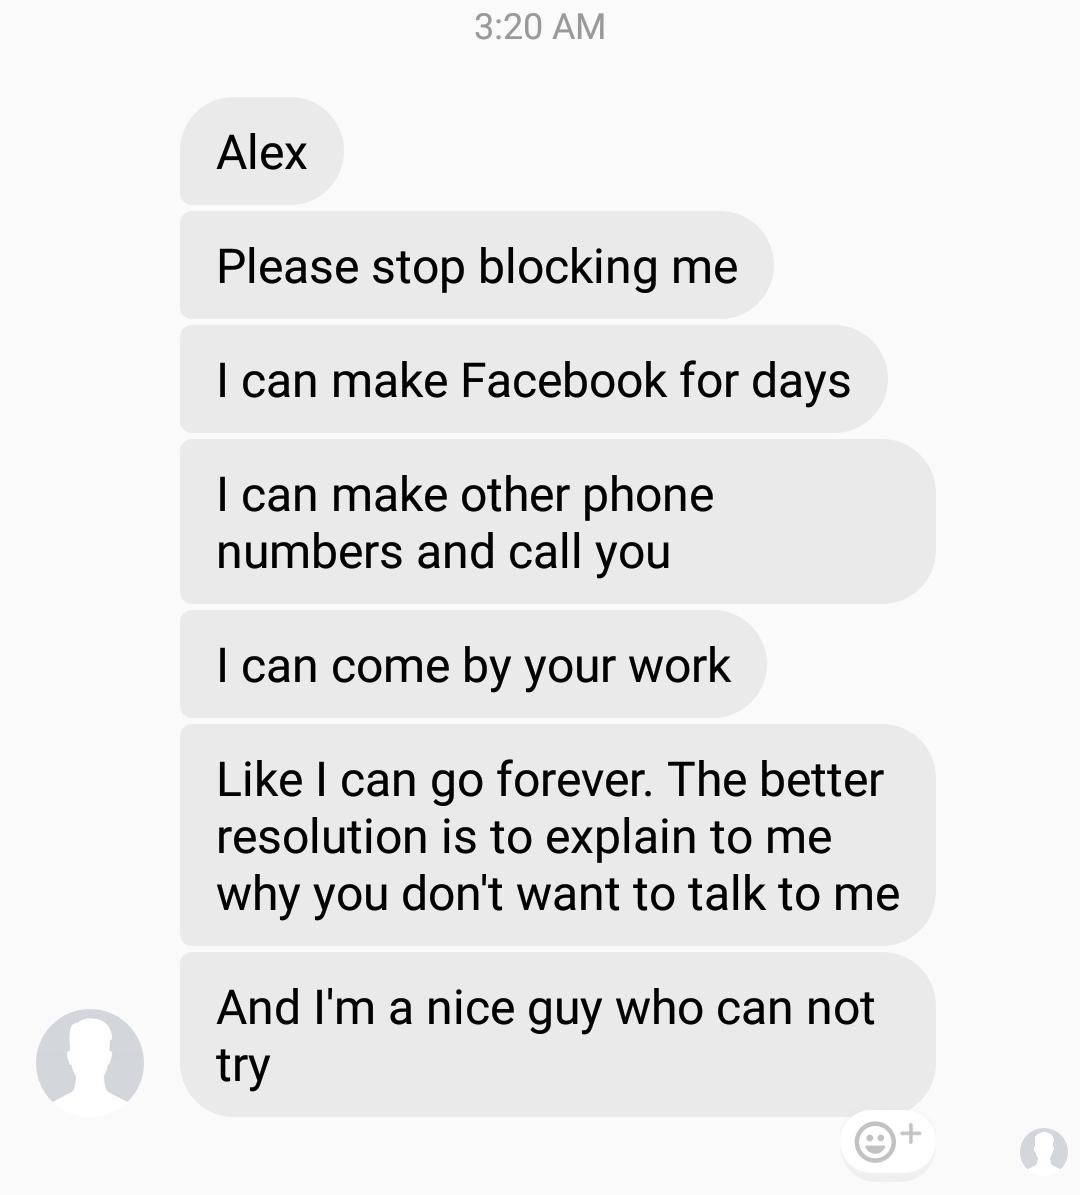 document - Alex Please stop blocking me I can make Facebook for days I can make other phone numbers and call you I can come by your work I can go forever. The better resolution is to explain to me why you don't want to talk to me And I'm a nice guy who ca